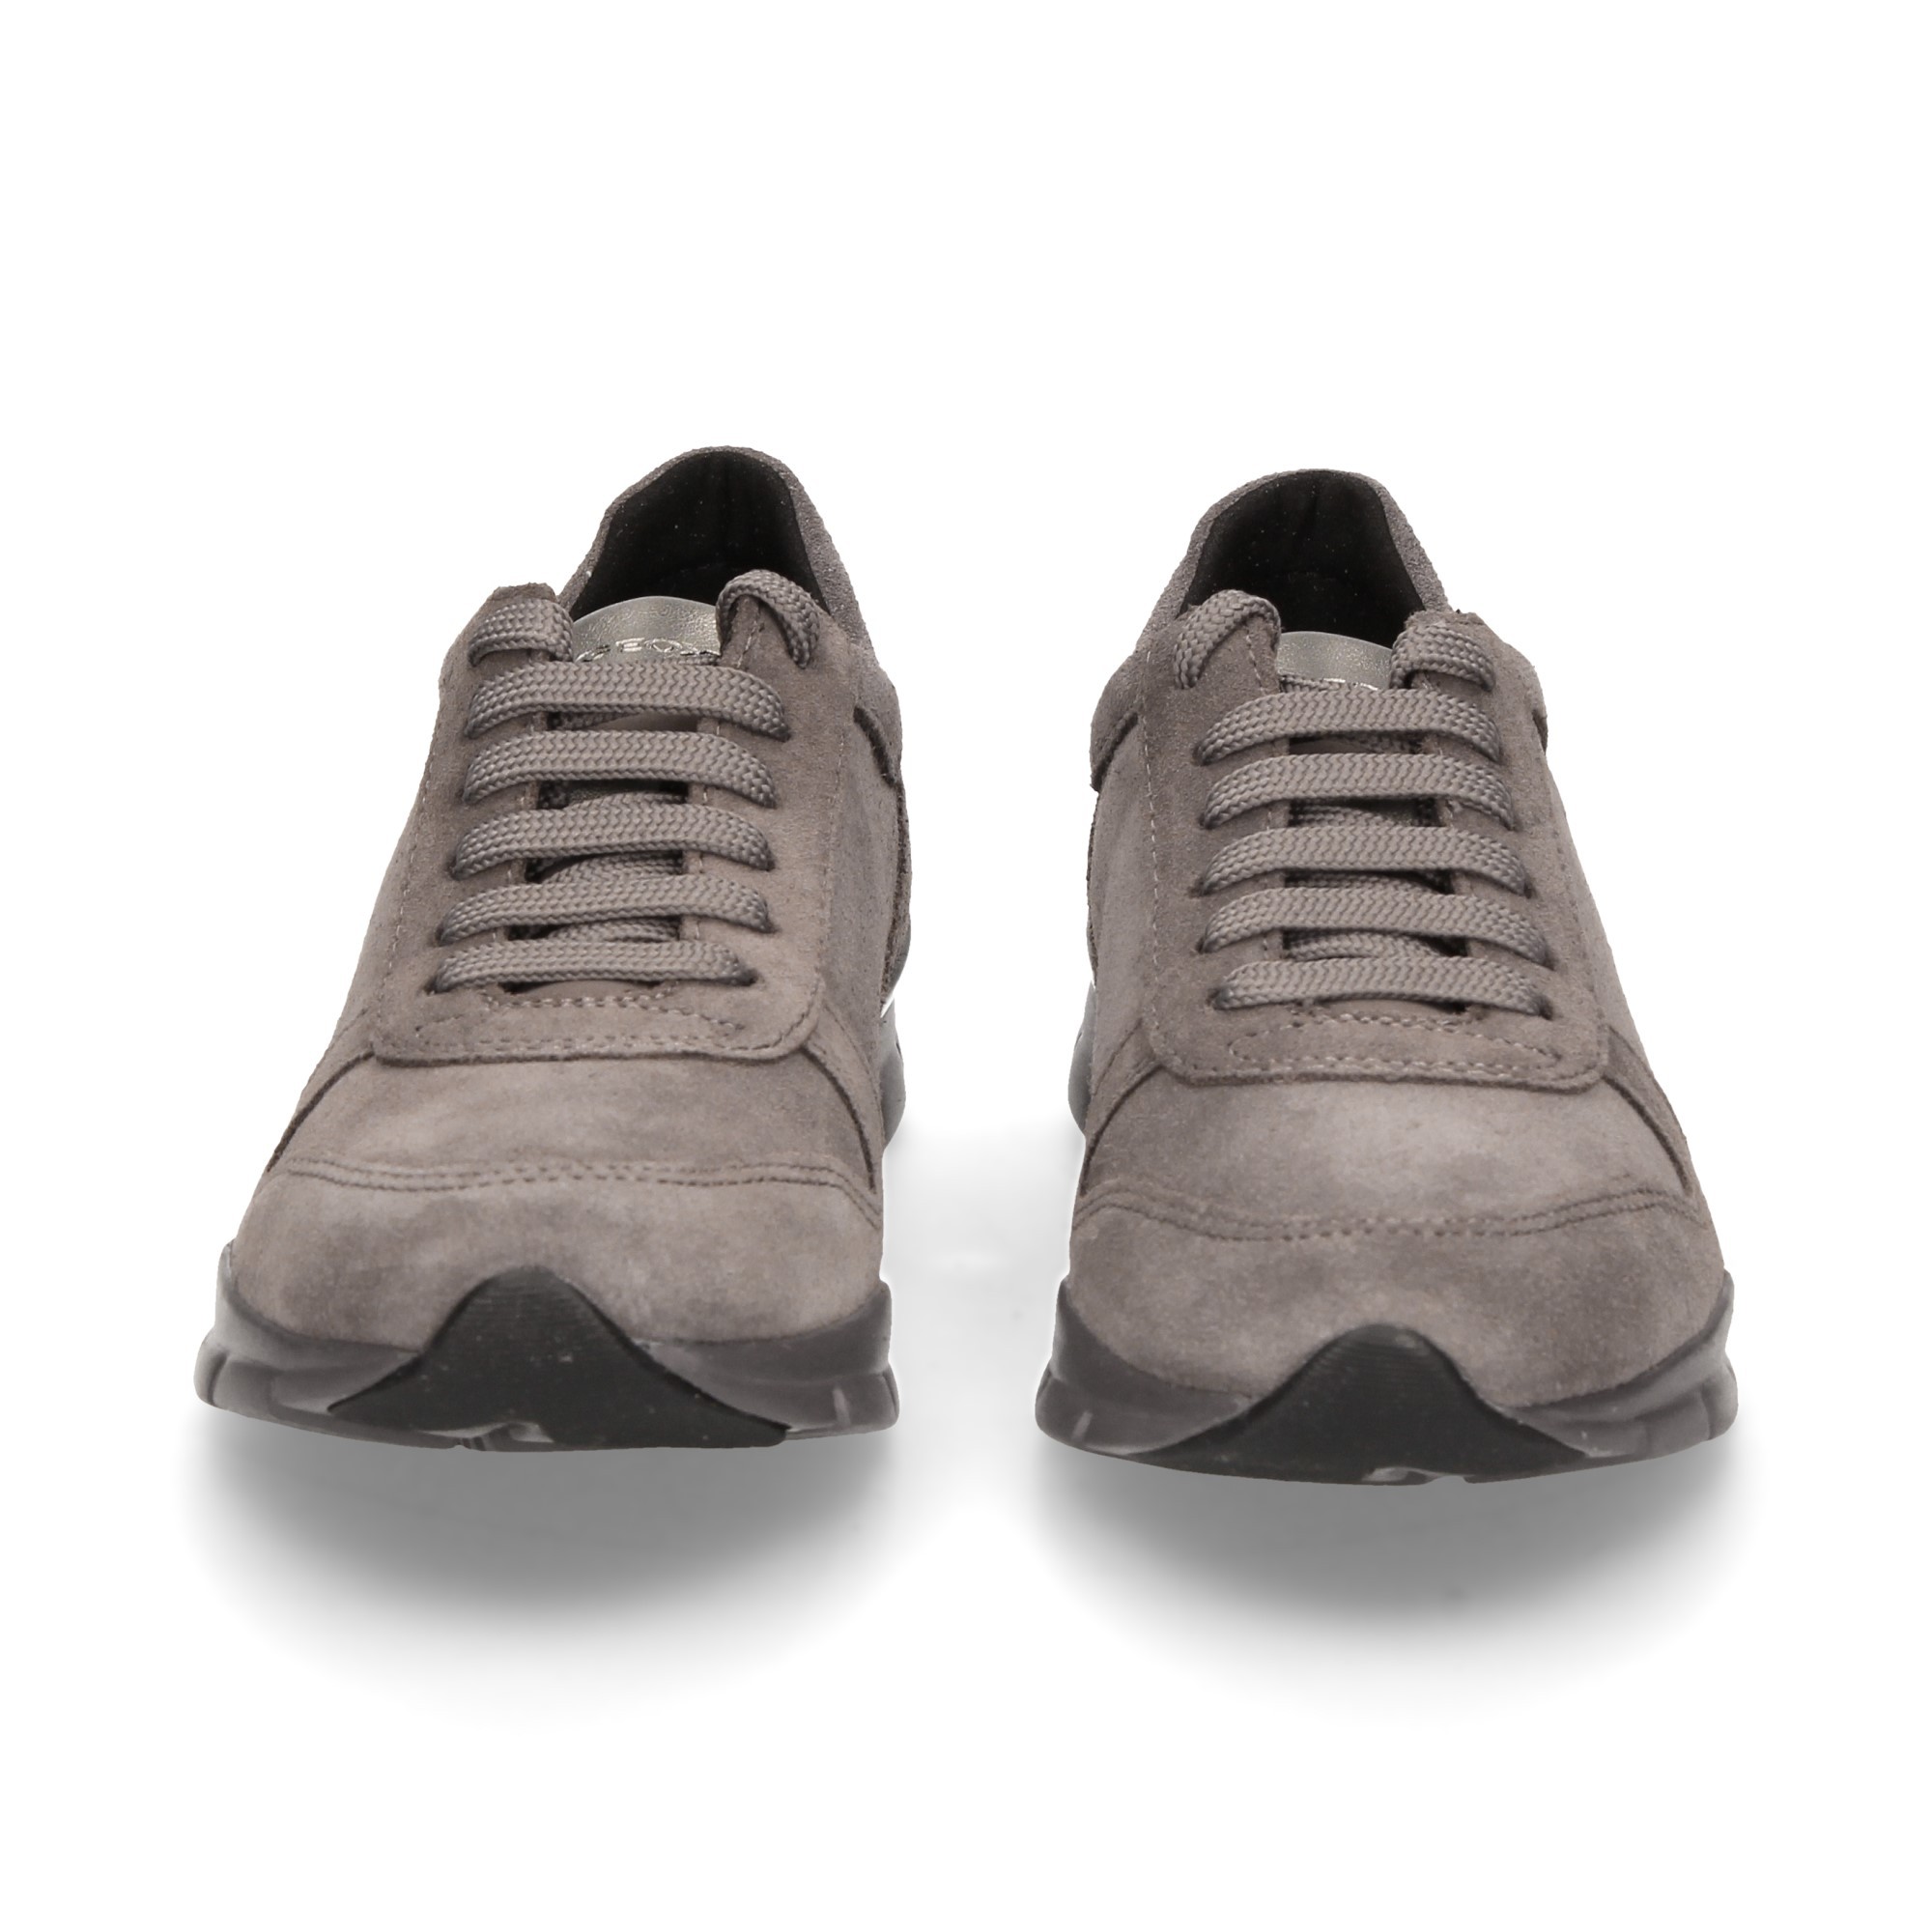 sporty-quilted-grey-suede